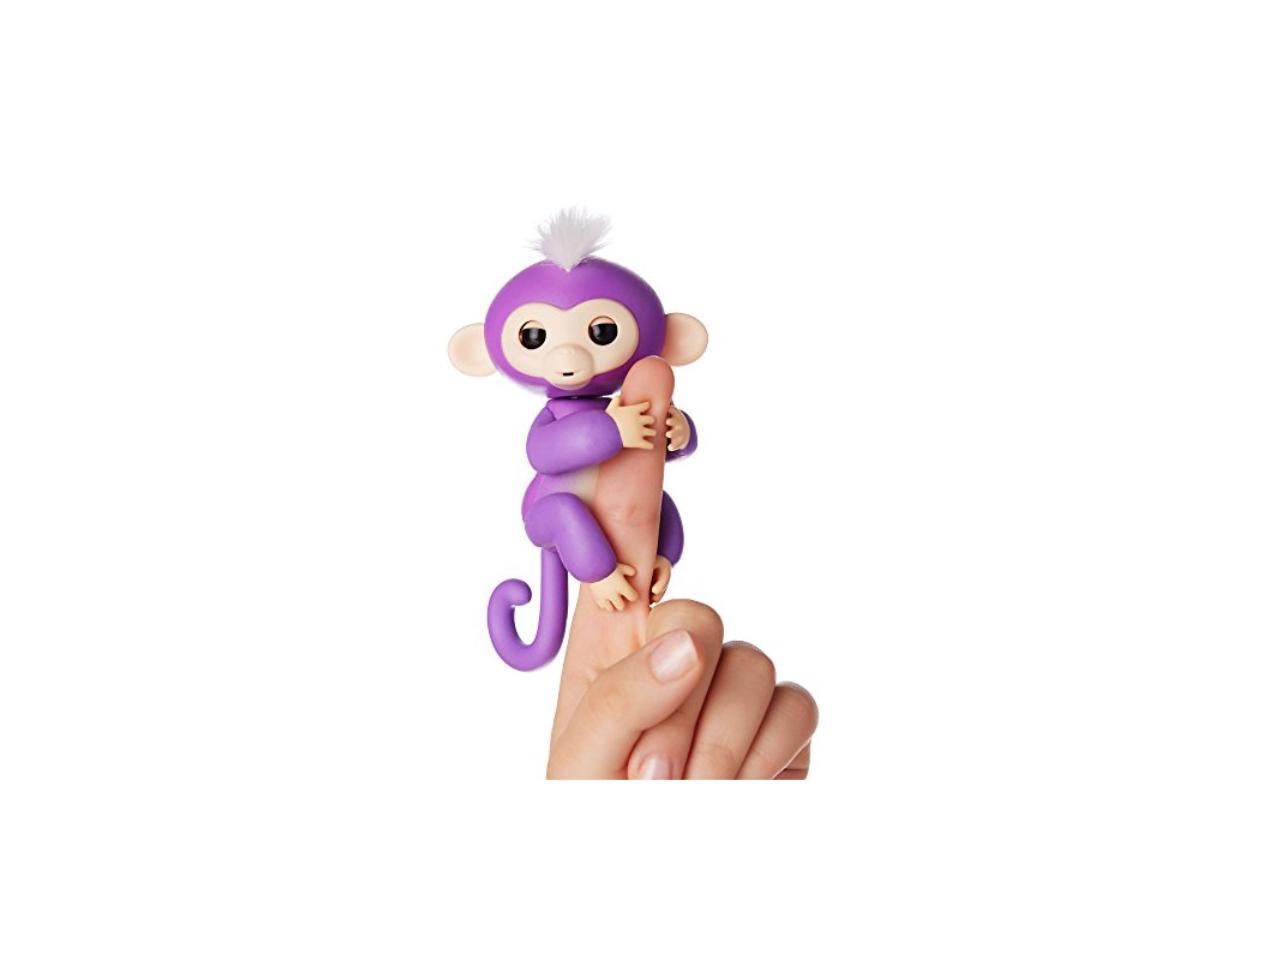 100% Authentic Toy WowWee FINGERLINGS Mia Baby Monkey Interactive Toy Purple 